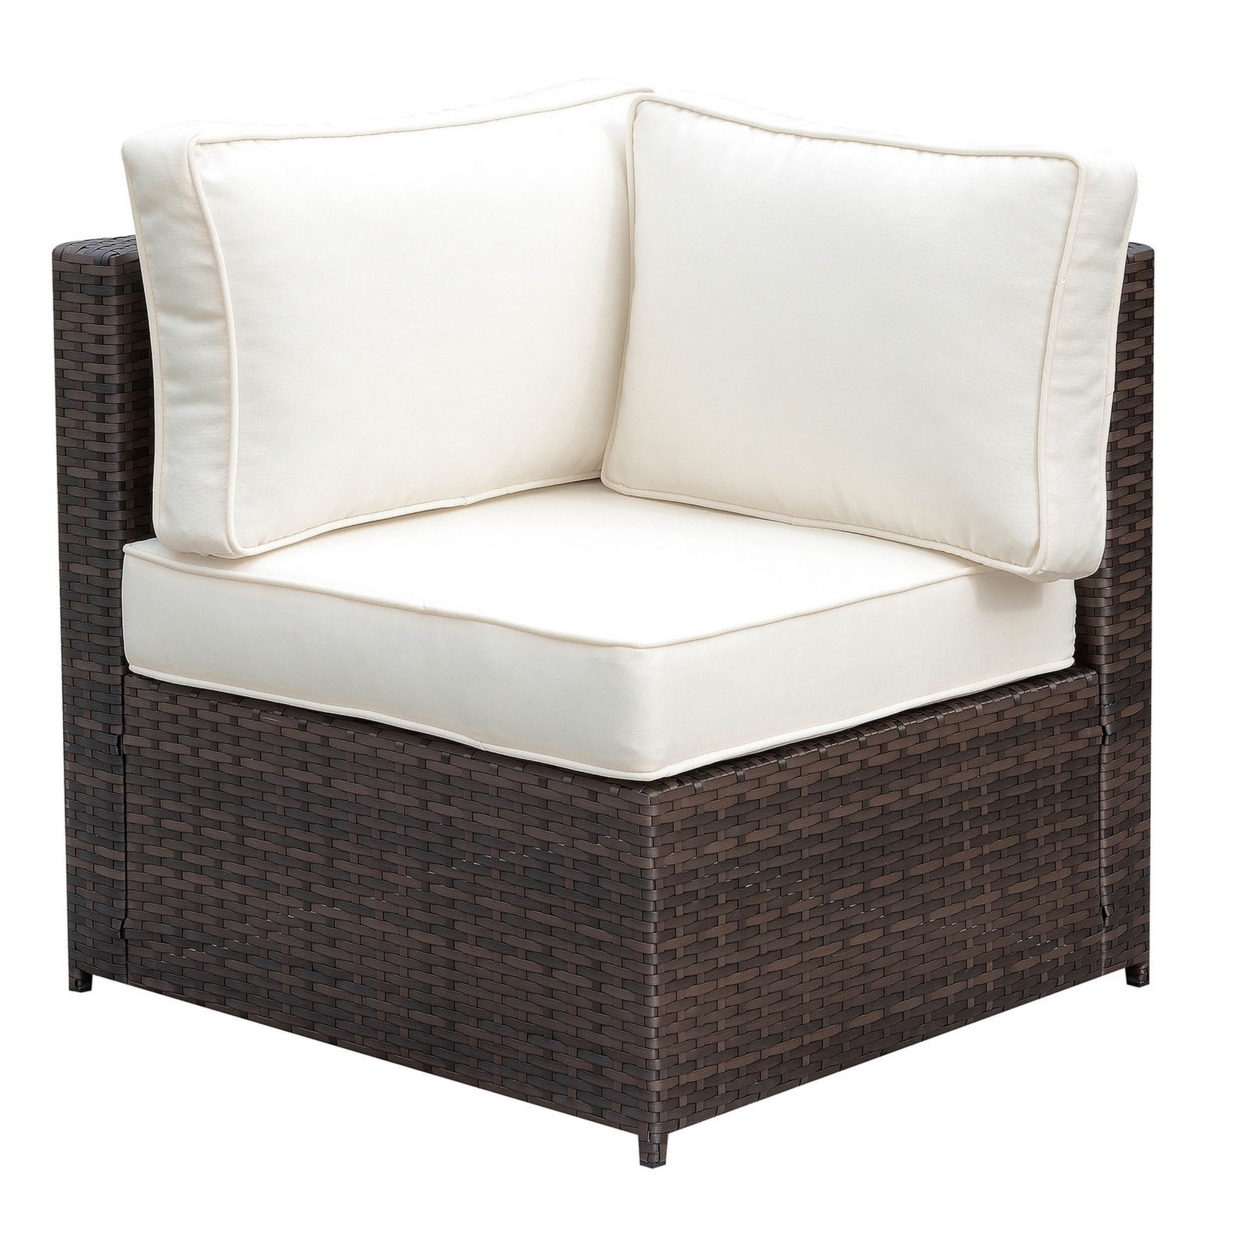 Faux Rattan Corner Chair With 1 Seat & 2 Back Cushions, Brown And Ivory- Saltoro Sherpi